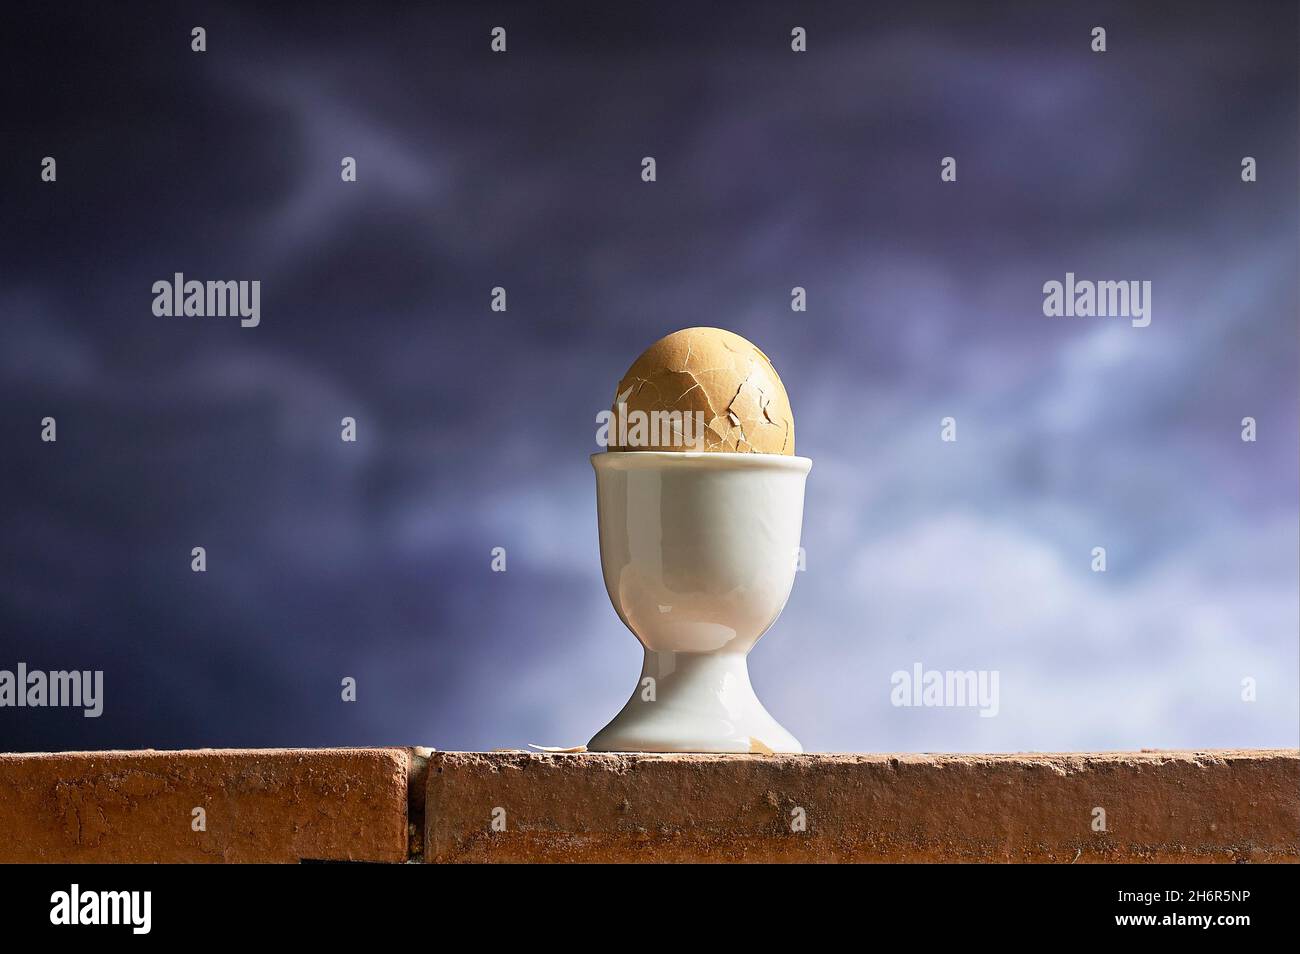 Smashed boiled egg in egg cup holder positioned on top of brick wall like humpty dumpty. Stock Photo